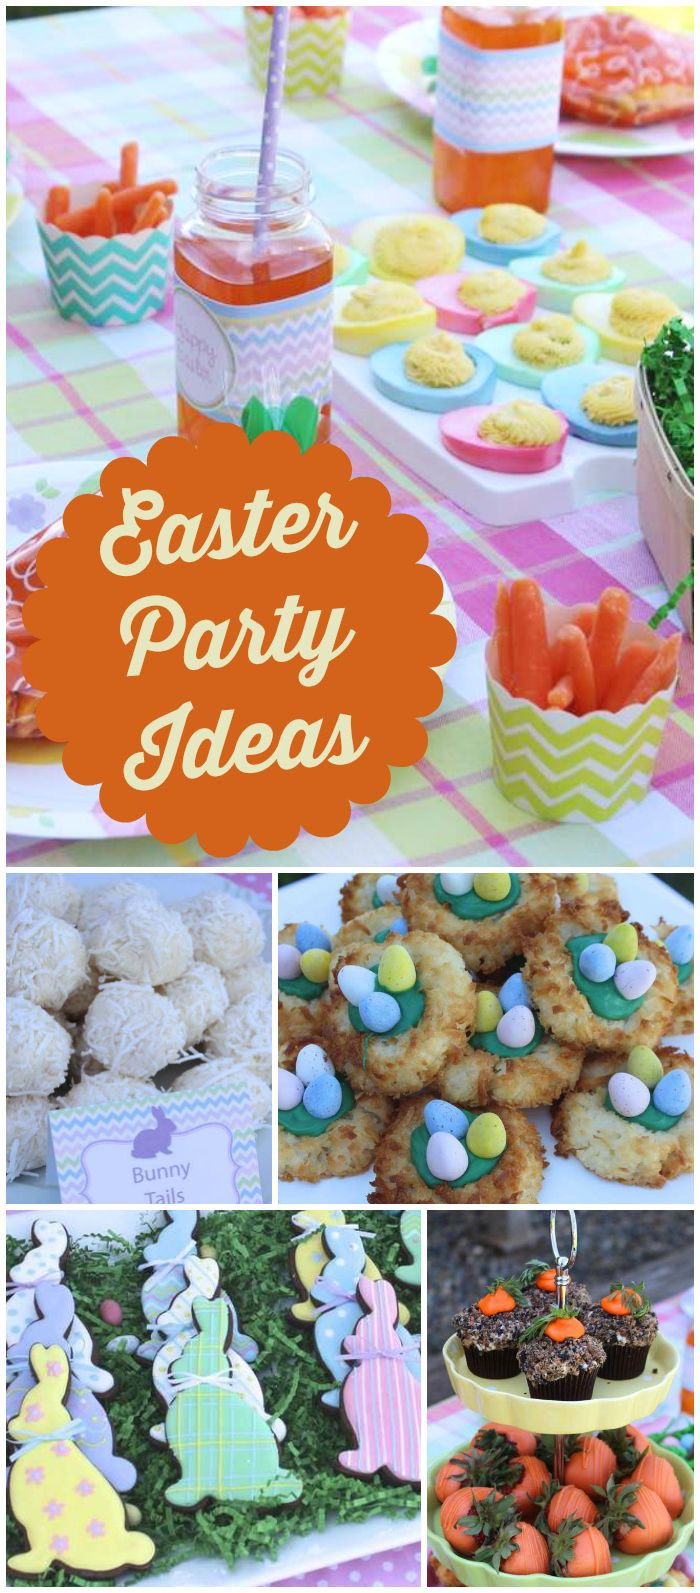 Easter Party Ideas For Church
 17 Best images about Church egg hunt on Pinterest